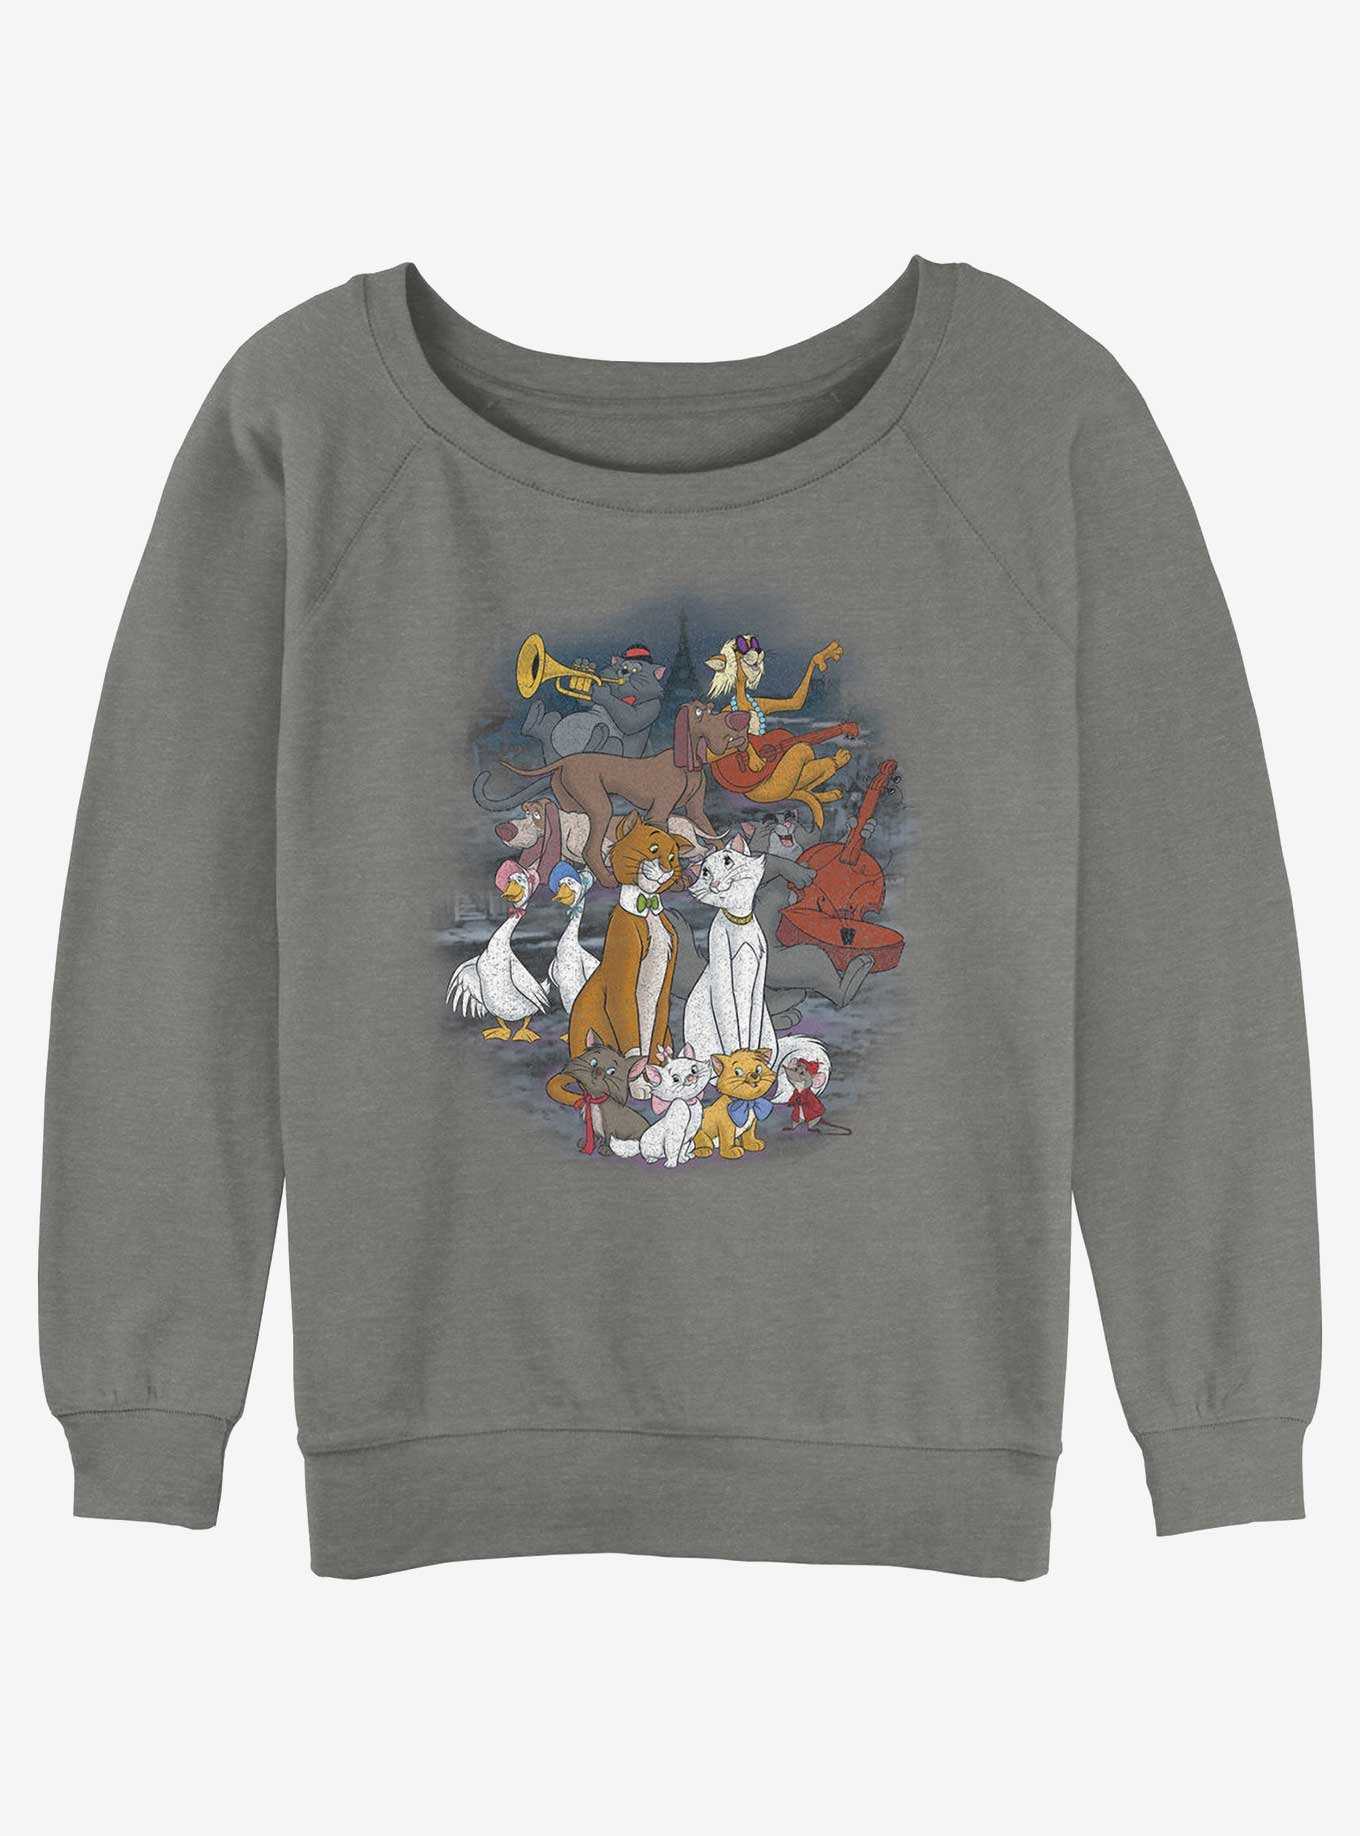 | Aristocats Topic OFFICIAL Shirts & Hot Merch Plushies,